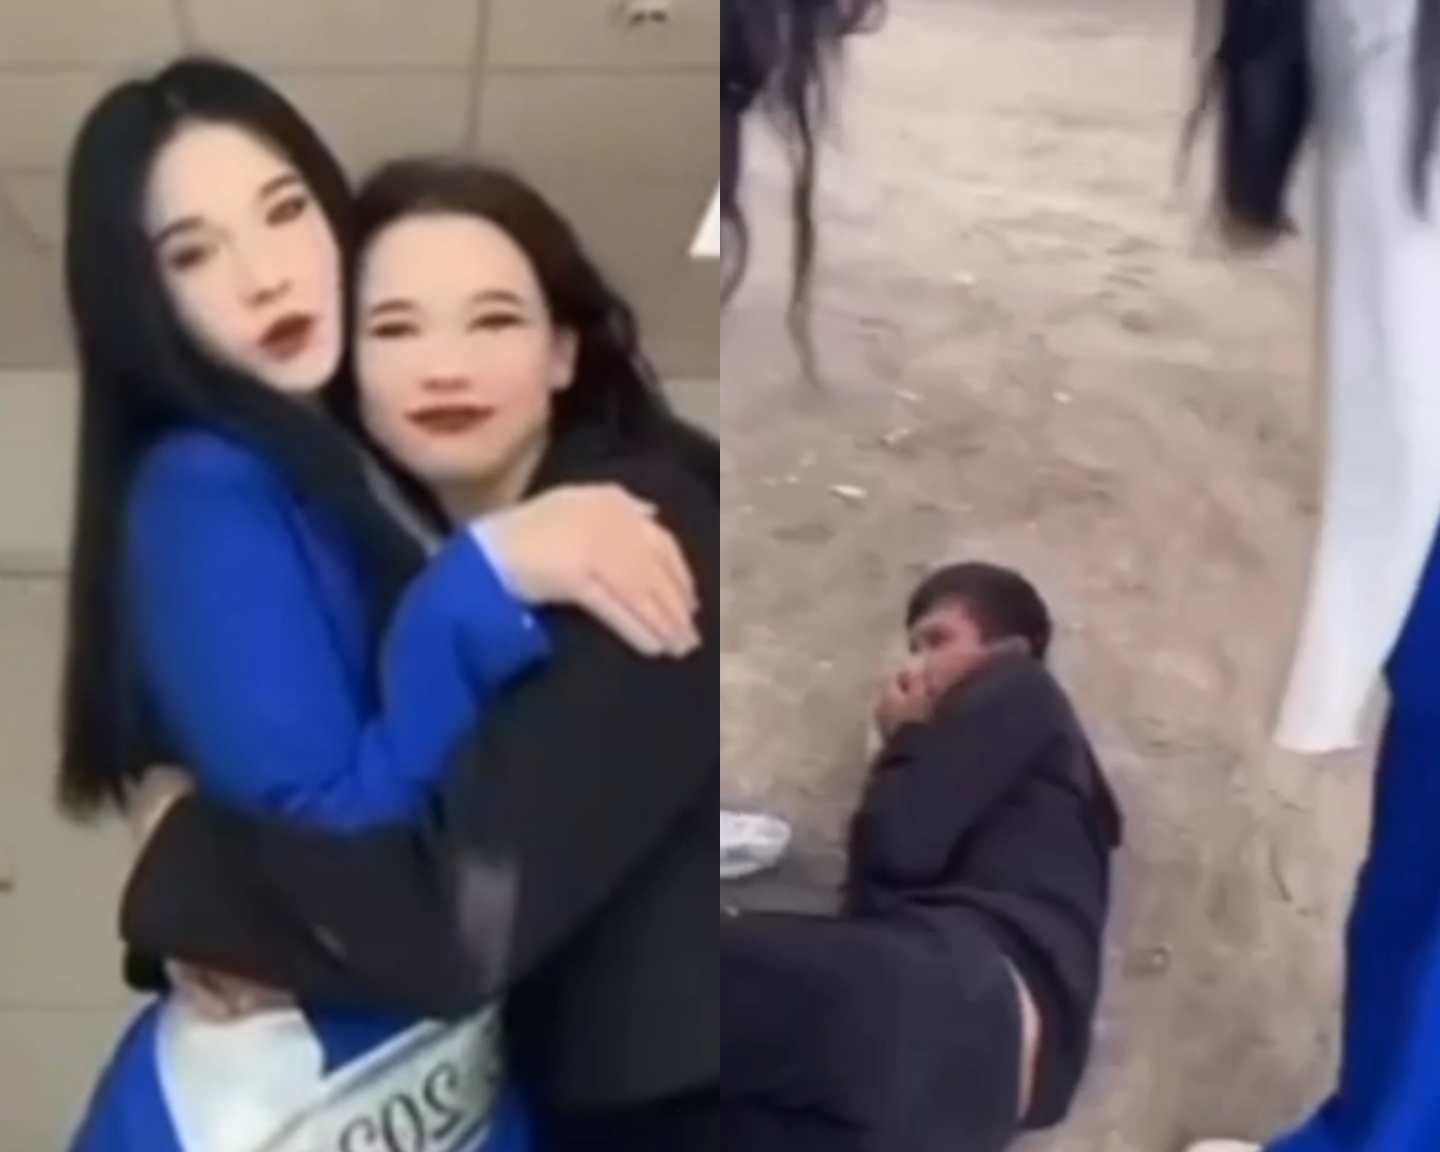 2 Girls Post Video on TikTok of How They Beats Up Dude Unknown to Them